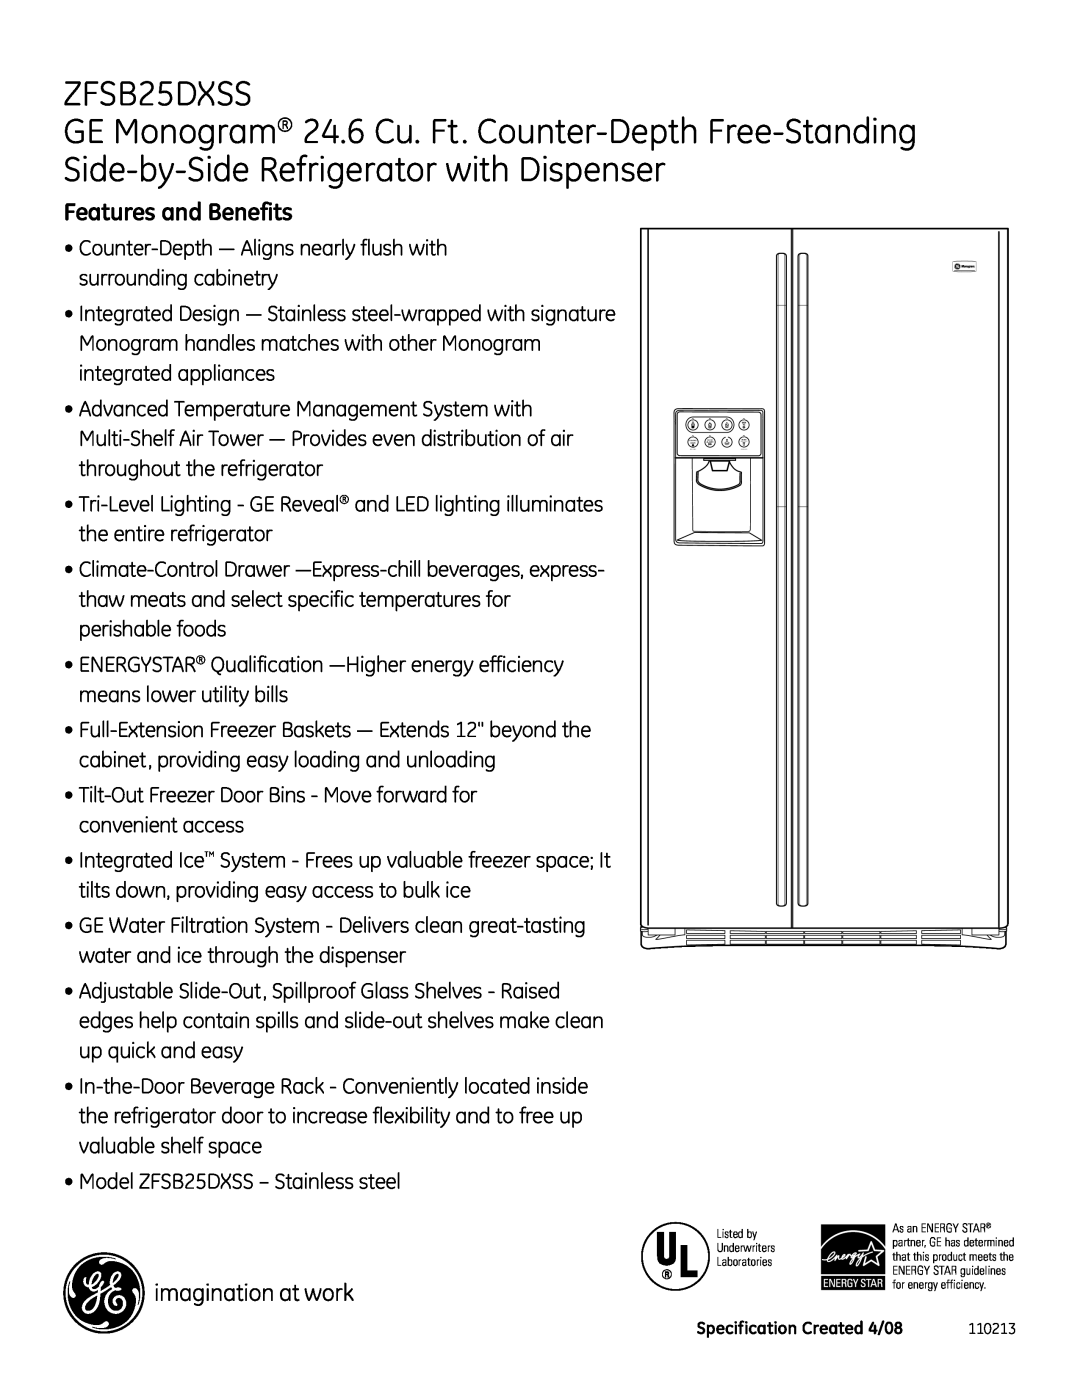 GE Monogram ZFSB25DXSS dimensions Features and Benefits 